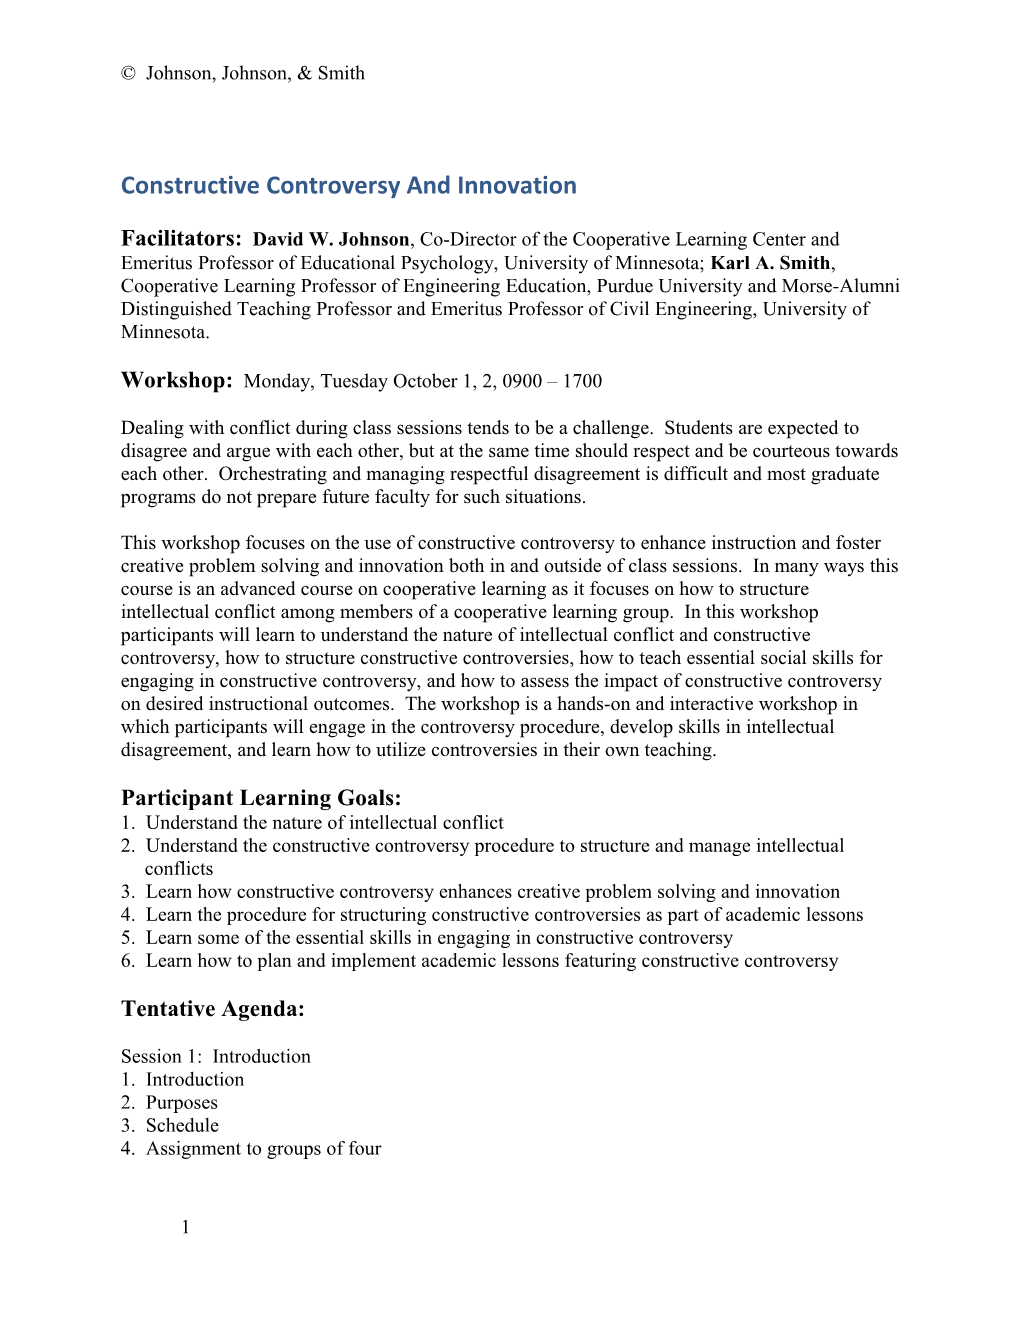 Constructive Controversy and Innovation